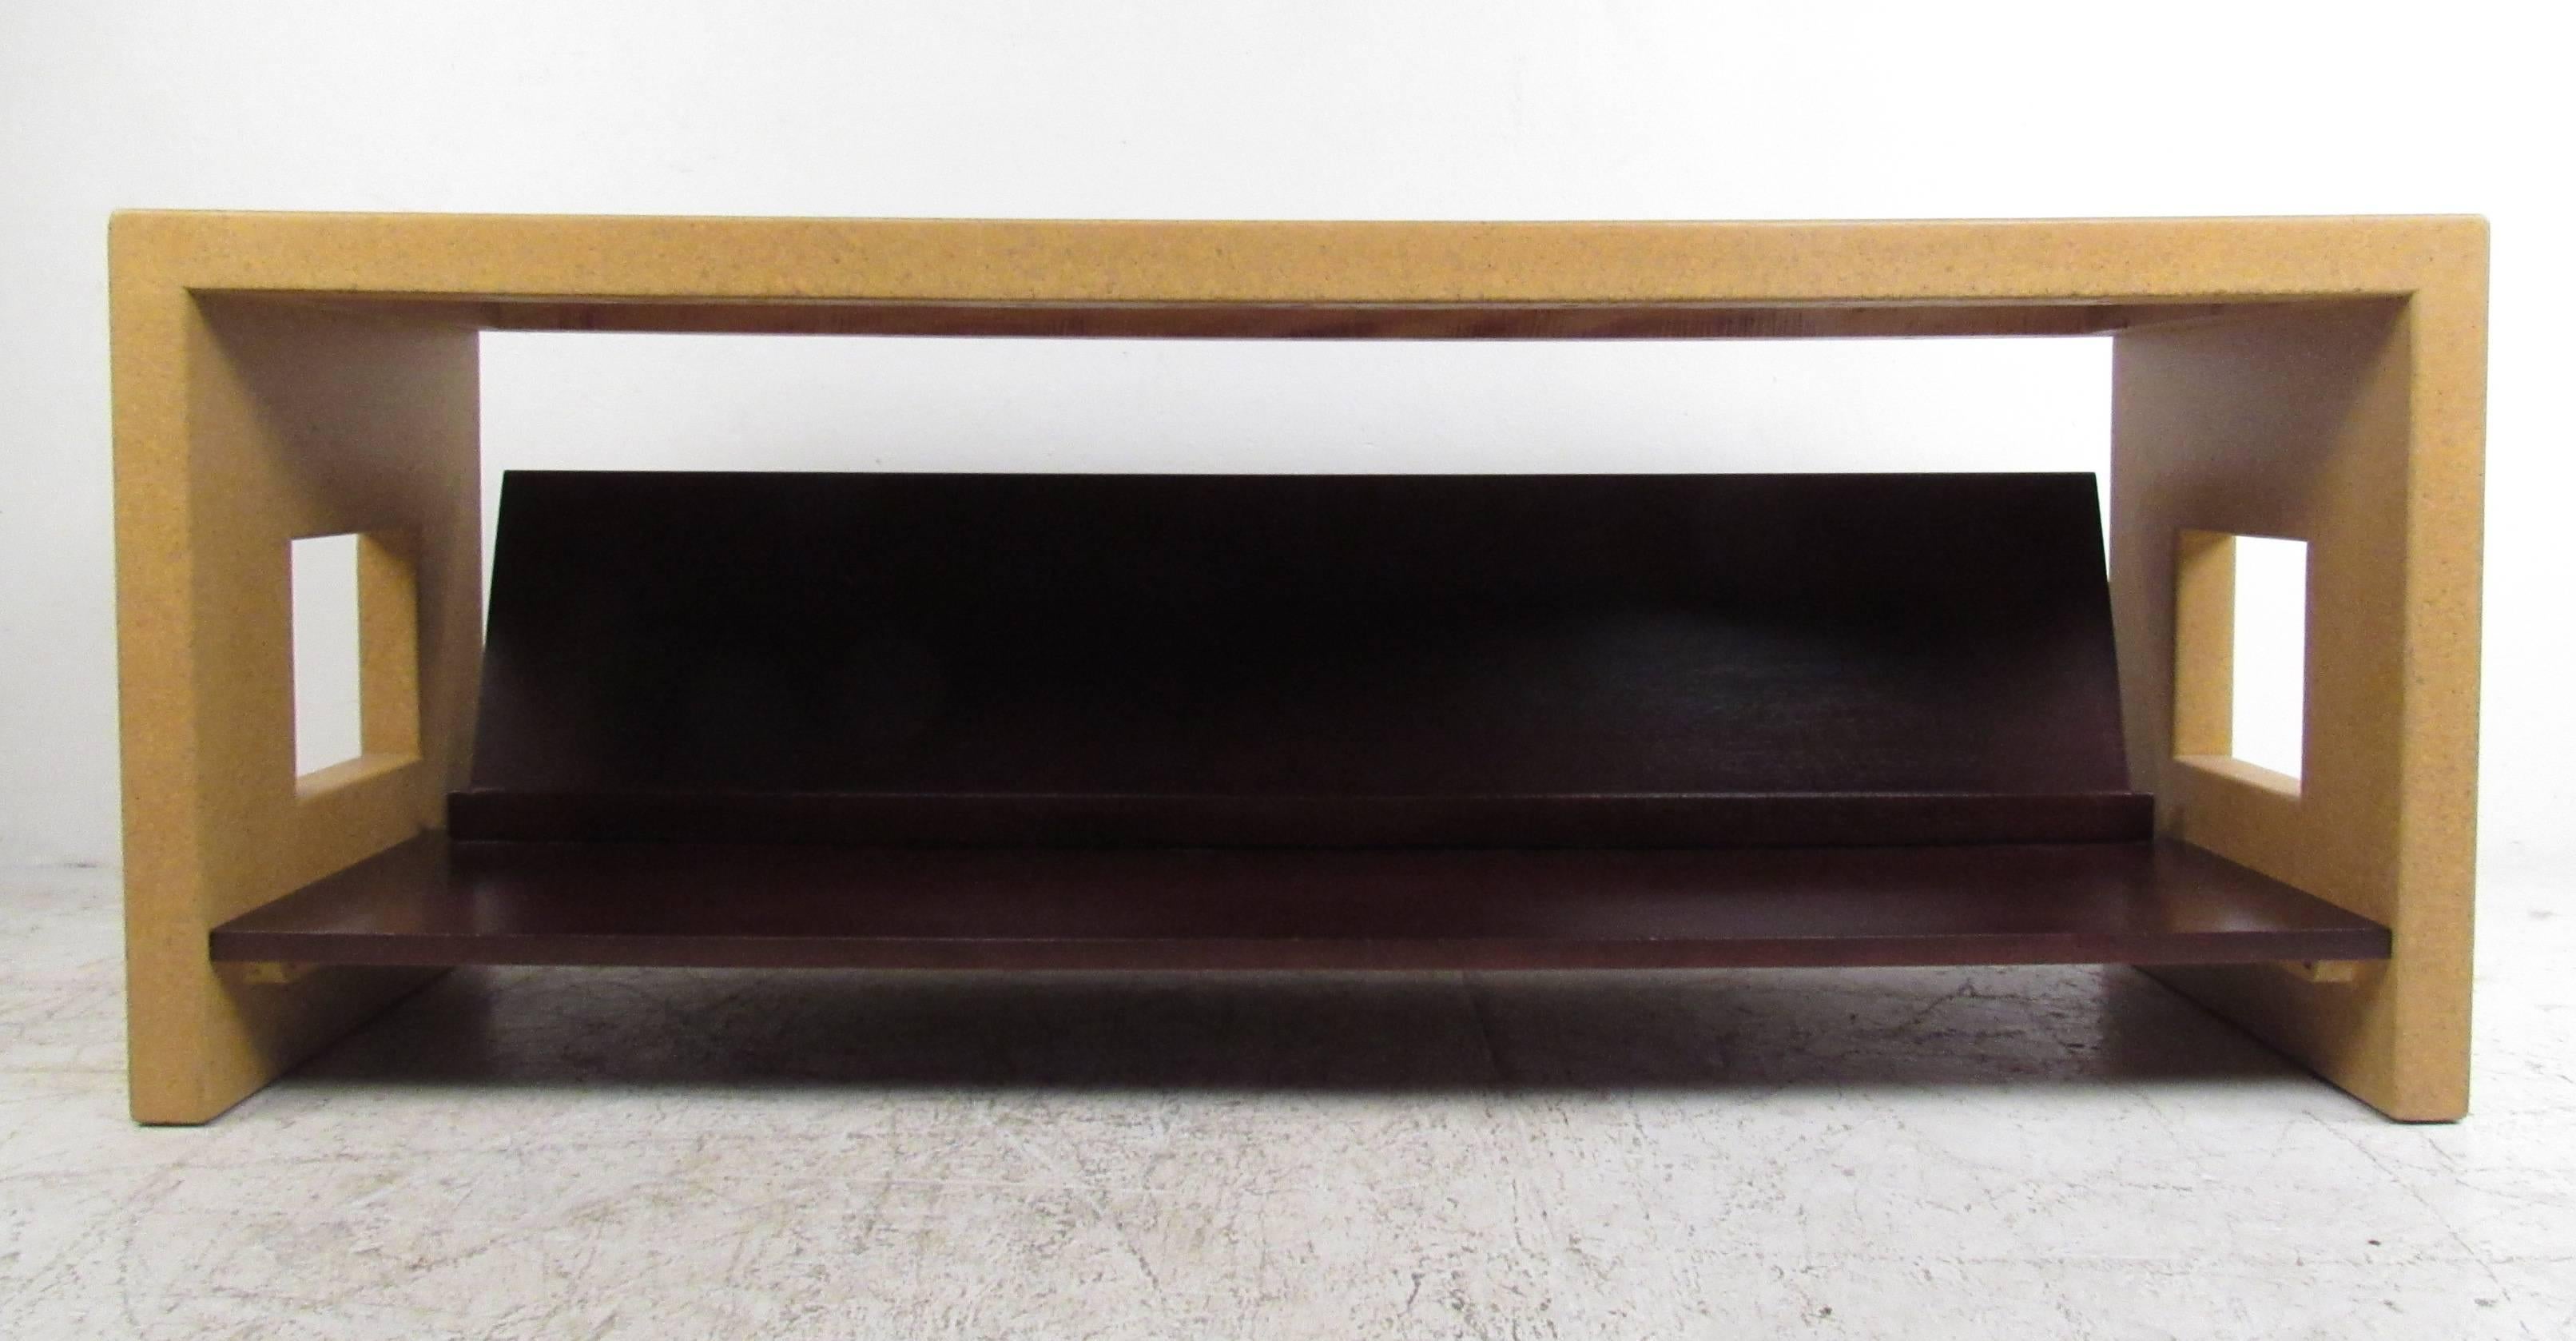 Unique lacquered cork and wood console table with literature shelf by noted American designer Paul Frankl, 1886-1958. Manufacturers stamp.  The understated magnificience of this vintage console by Frankl makes it an appealing view from every angle,